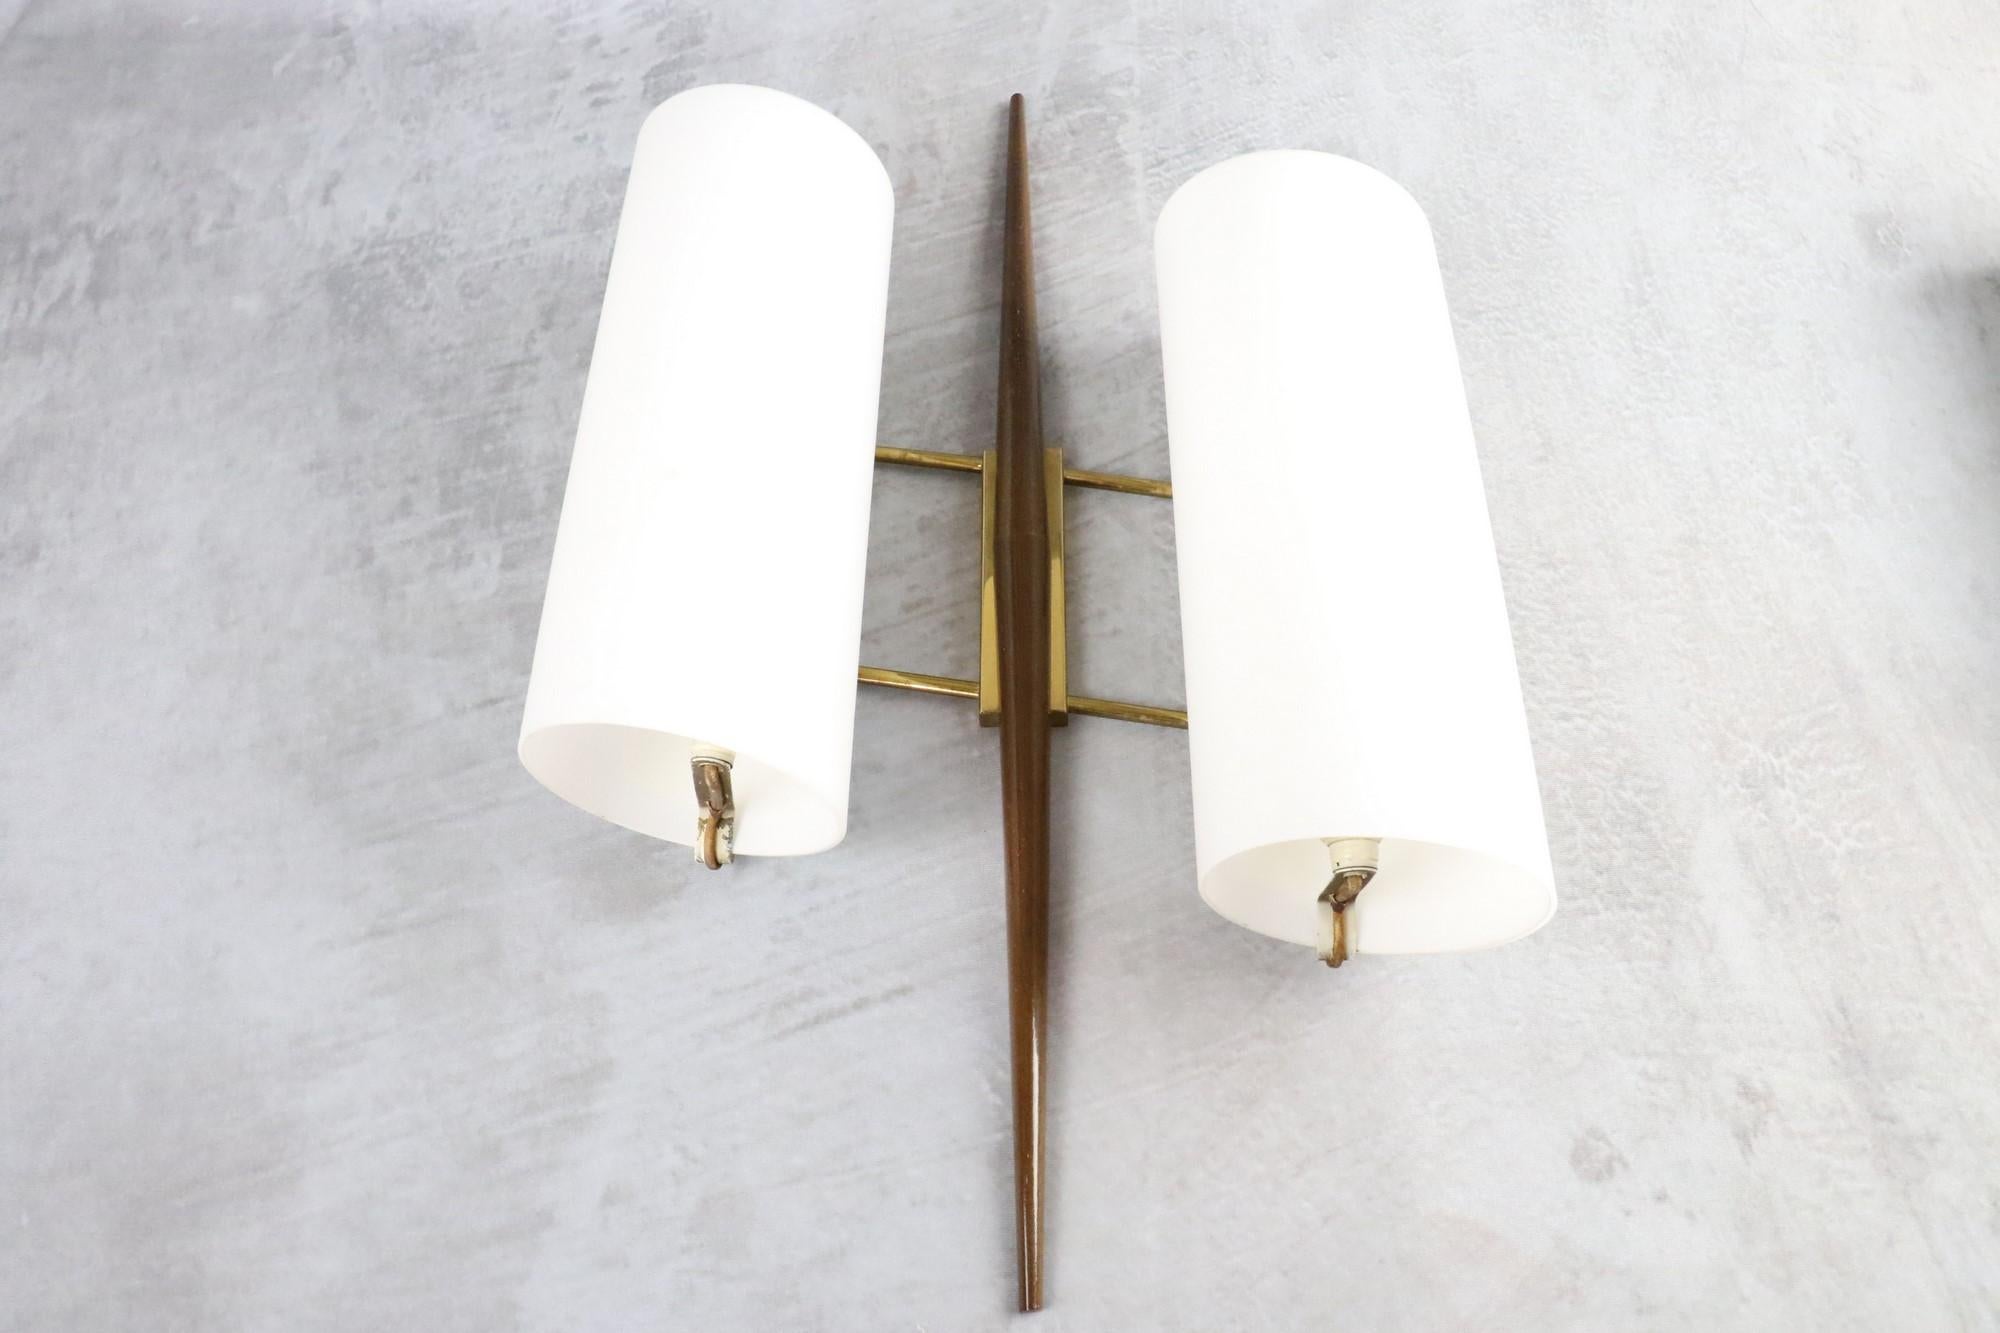 Maison Arlus, Pair of Mid-Century Modern Double Lighting Wall Lamps 1950s France 4